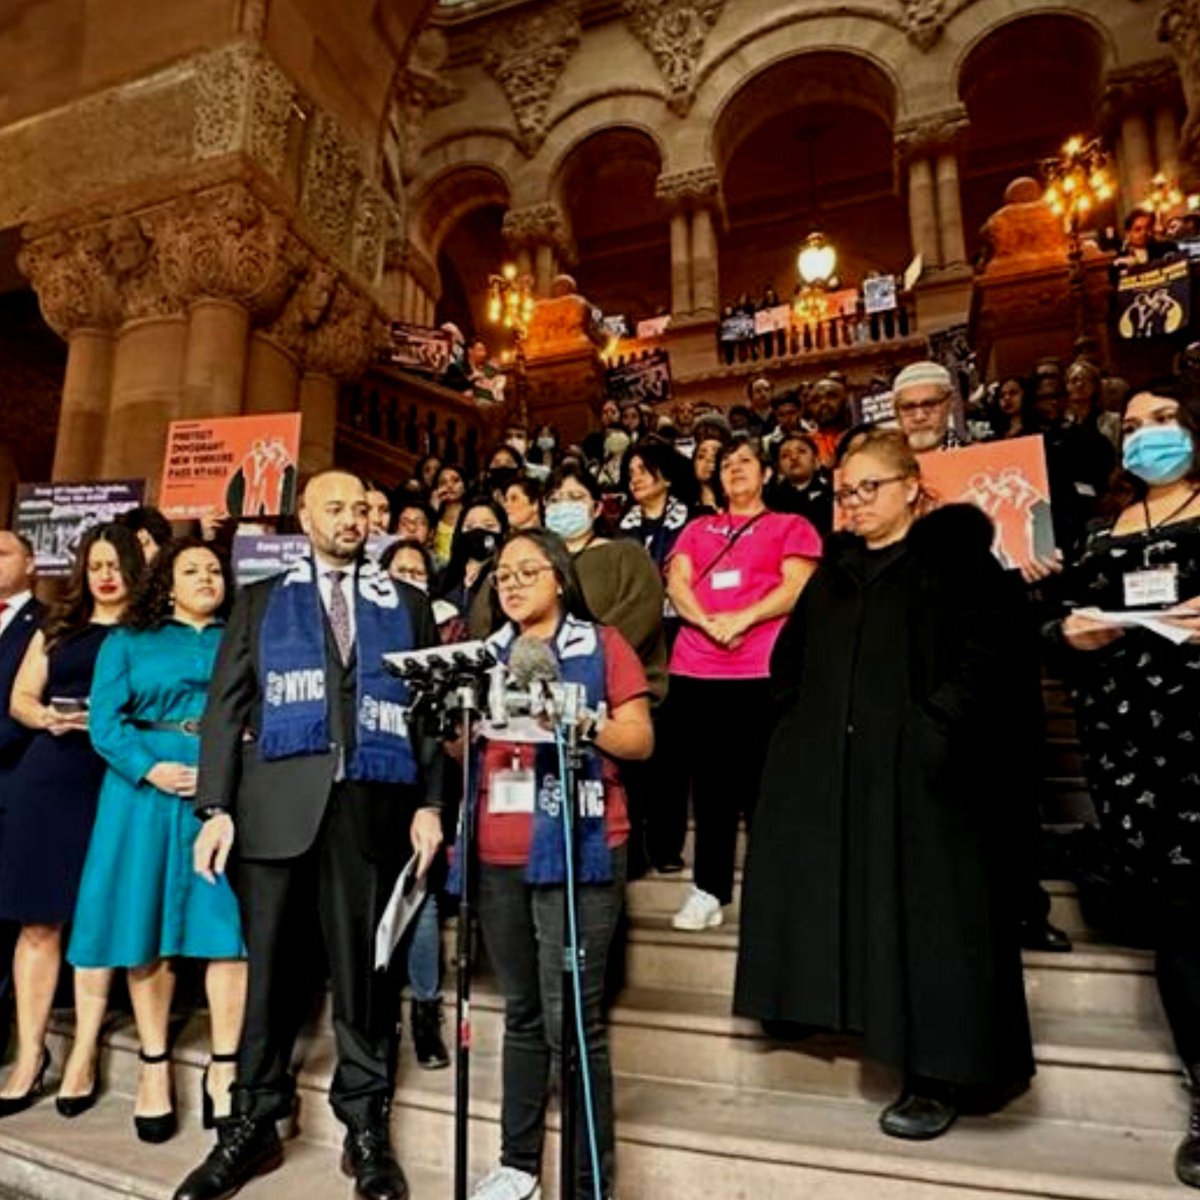 Yesterday we were in Albany with @thenyic advocating for a NYS agenda that supports immigrant communities. #WelcomingNY #NY4All #AccesstoRepresentation #LanguageAccess #ONA